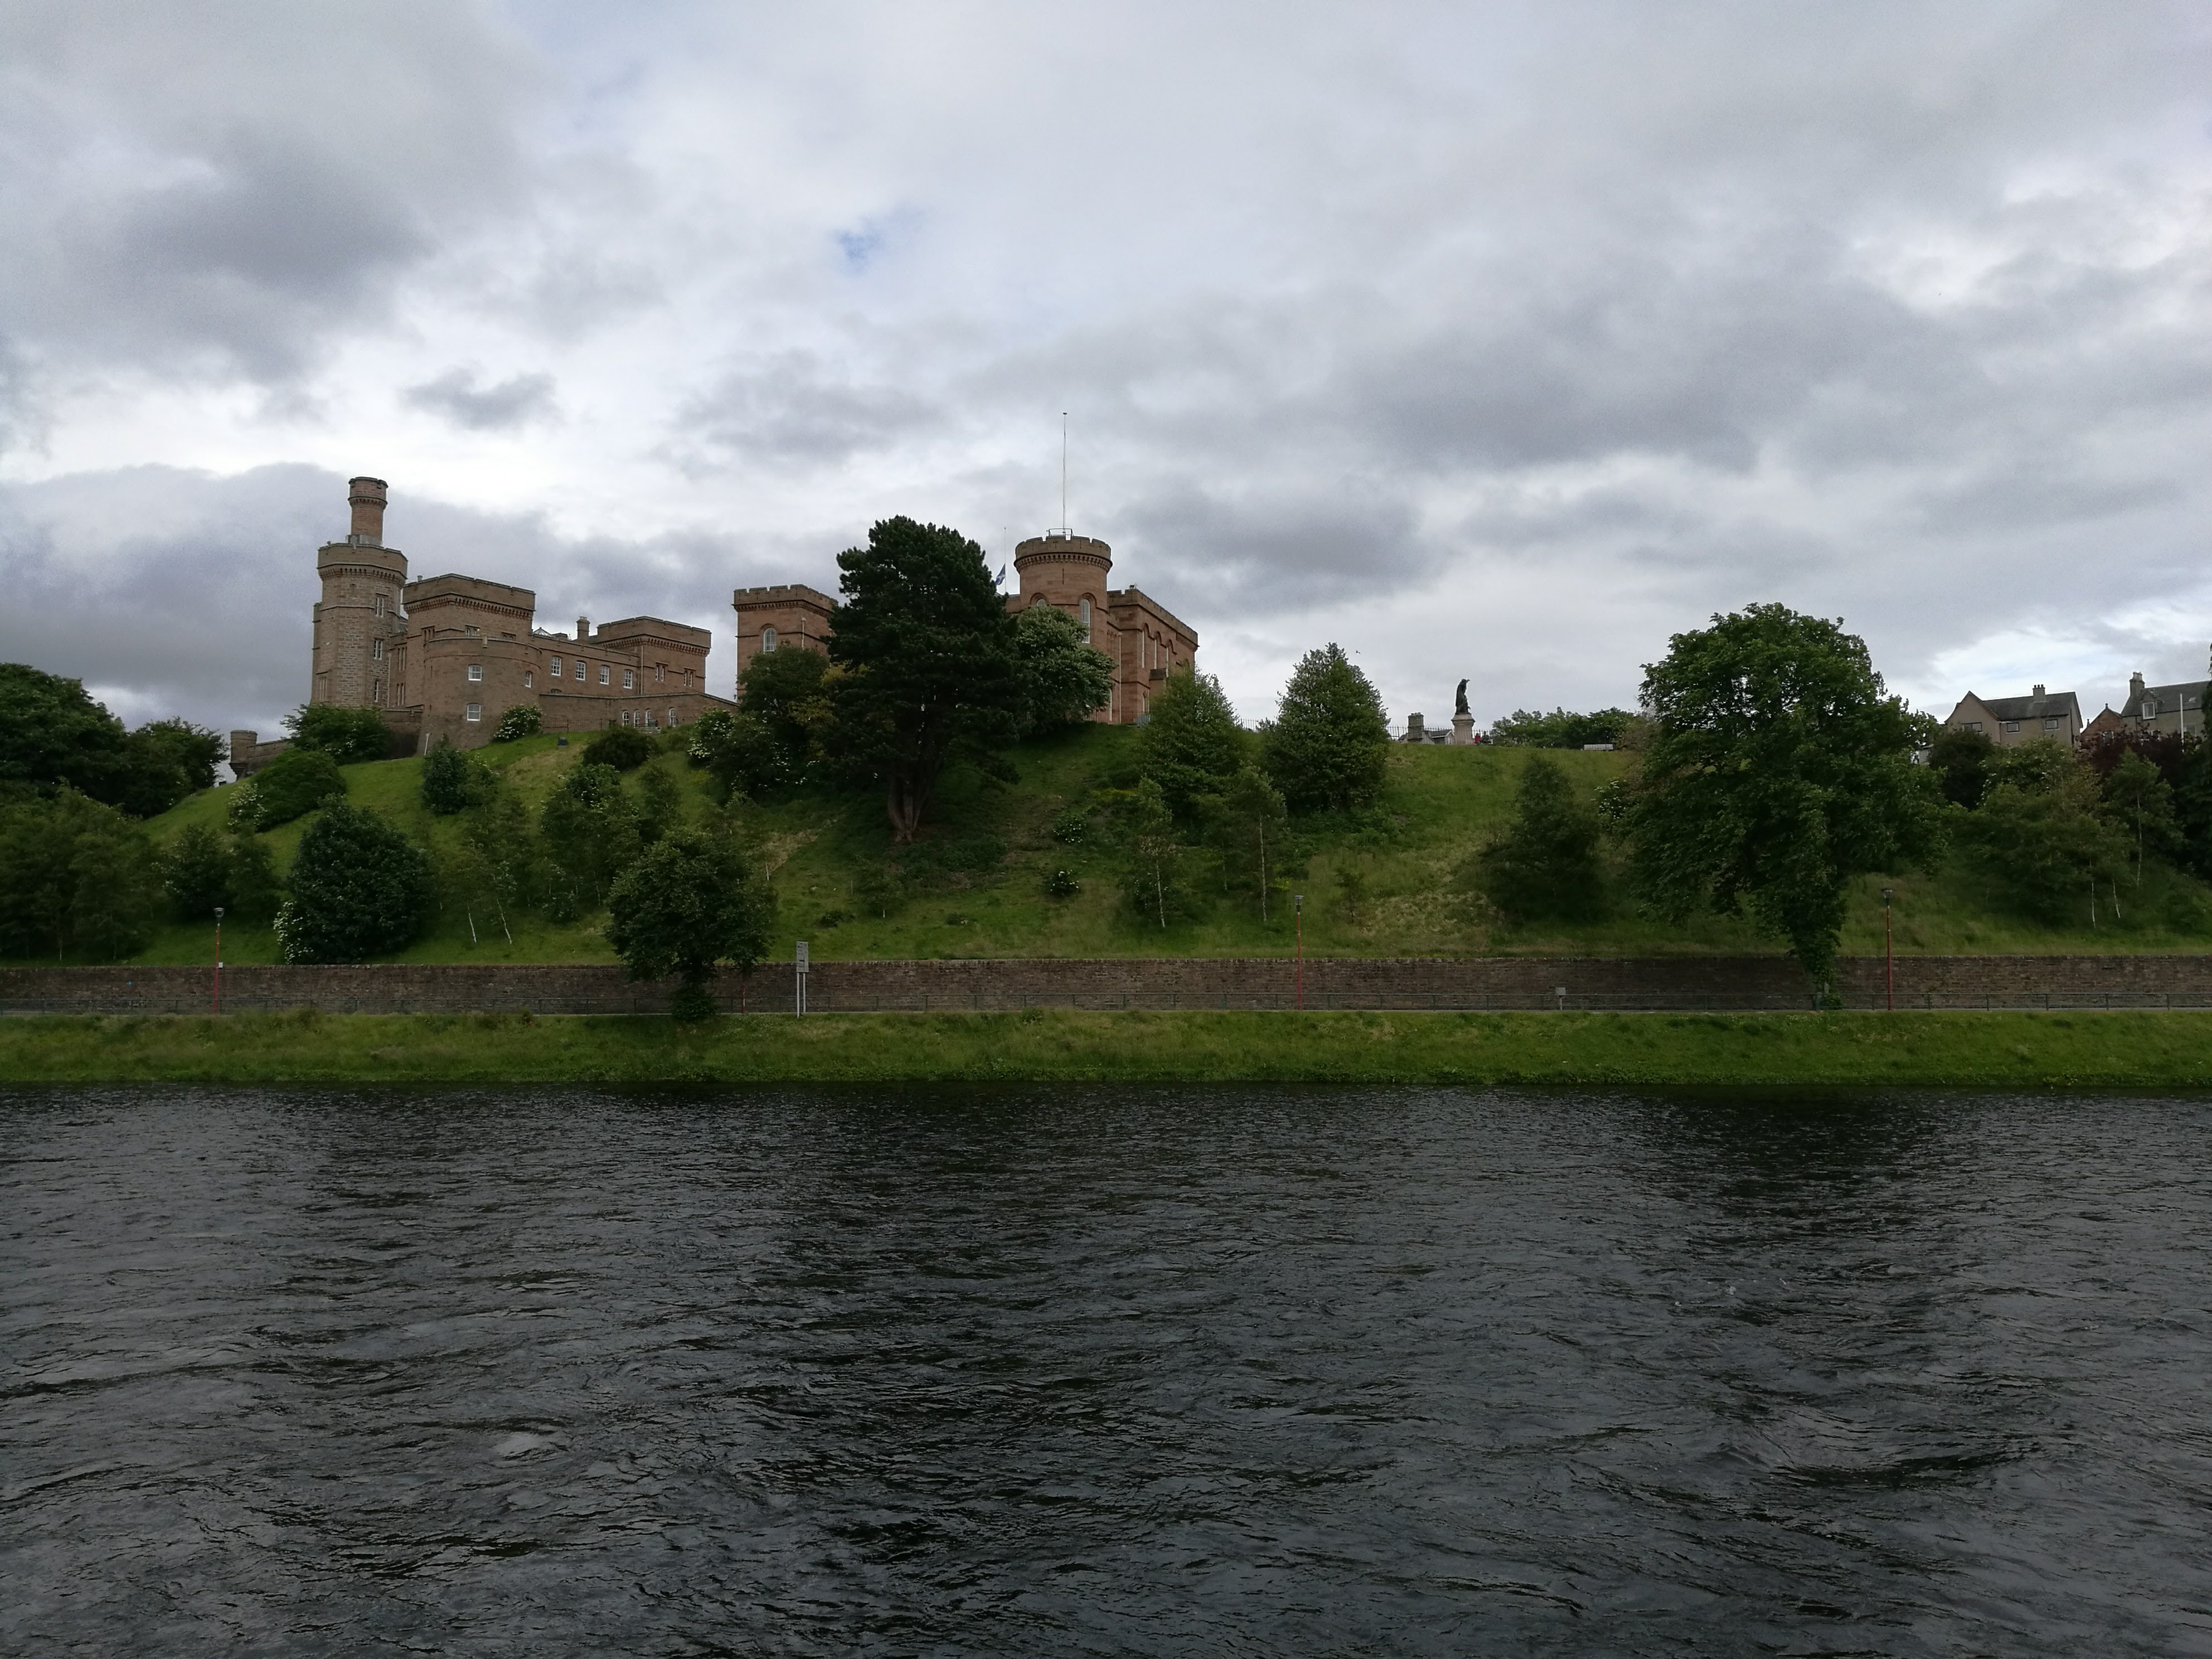 The castle at Inverness